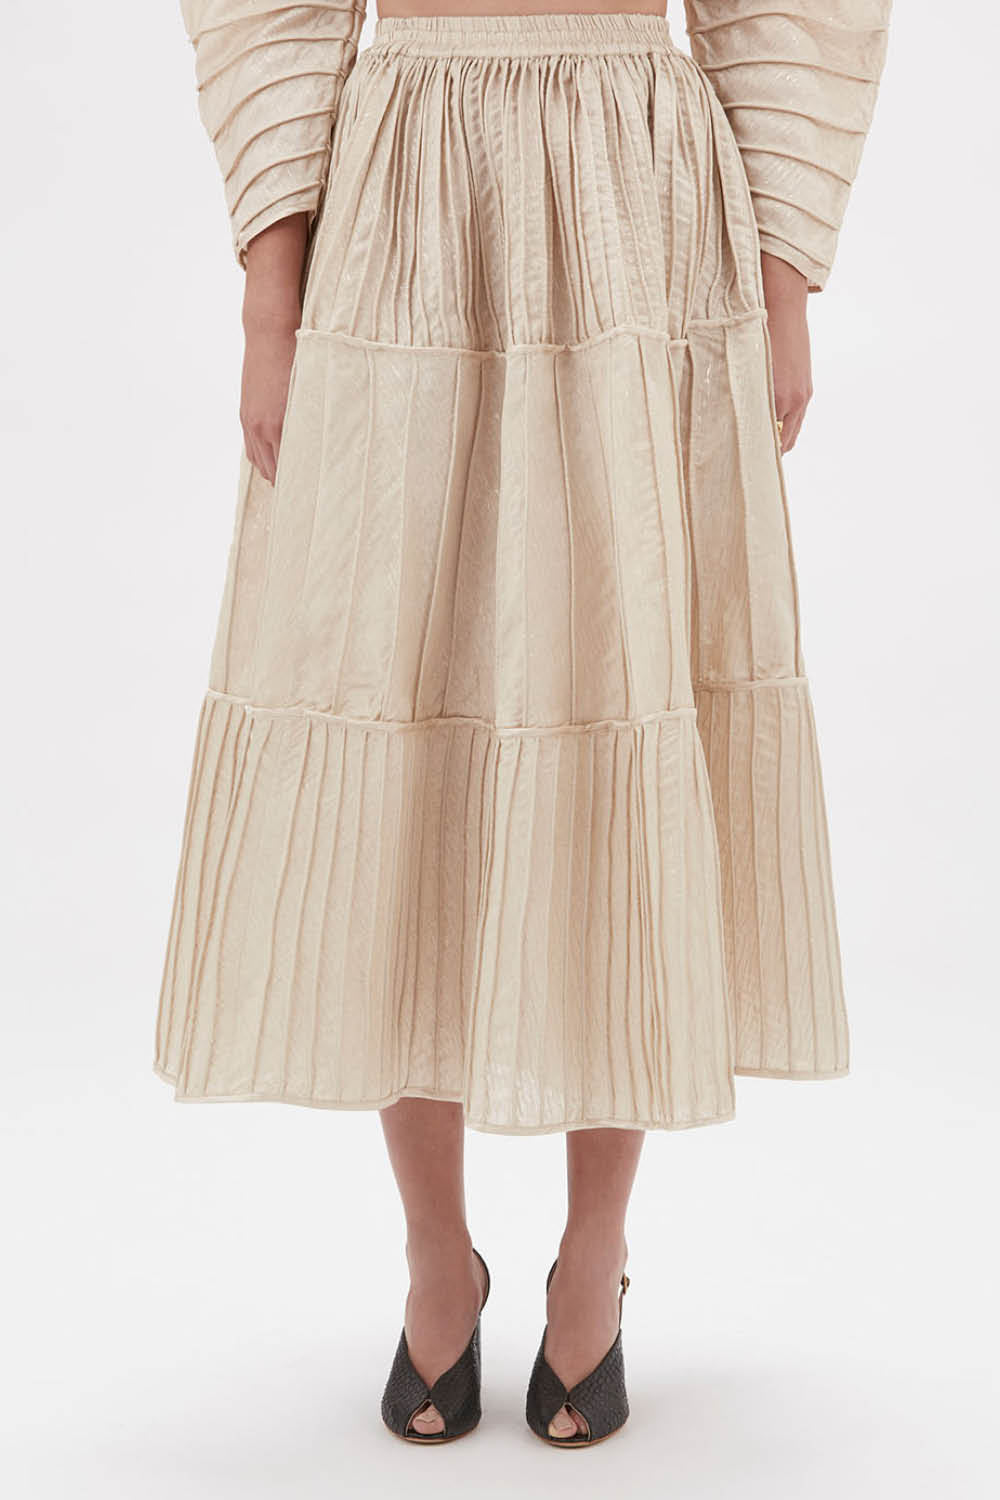 Afaf Handpiped Skirt in Cream